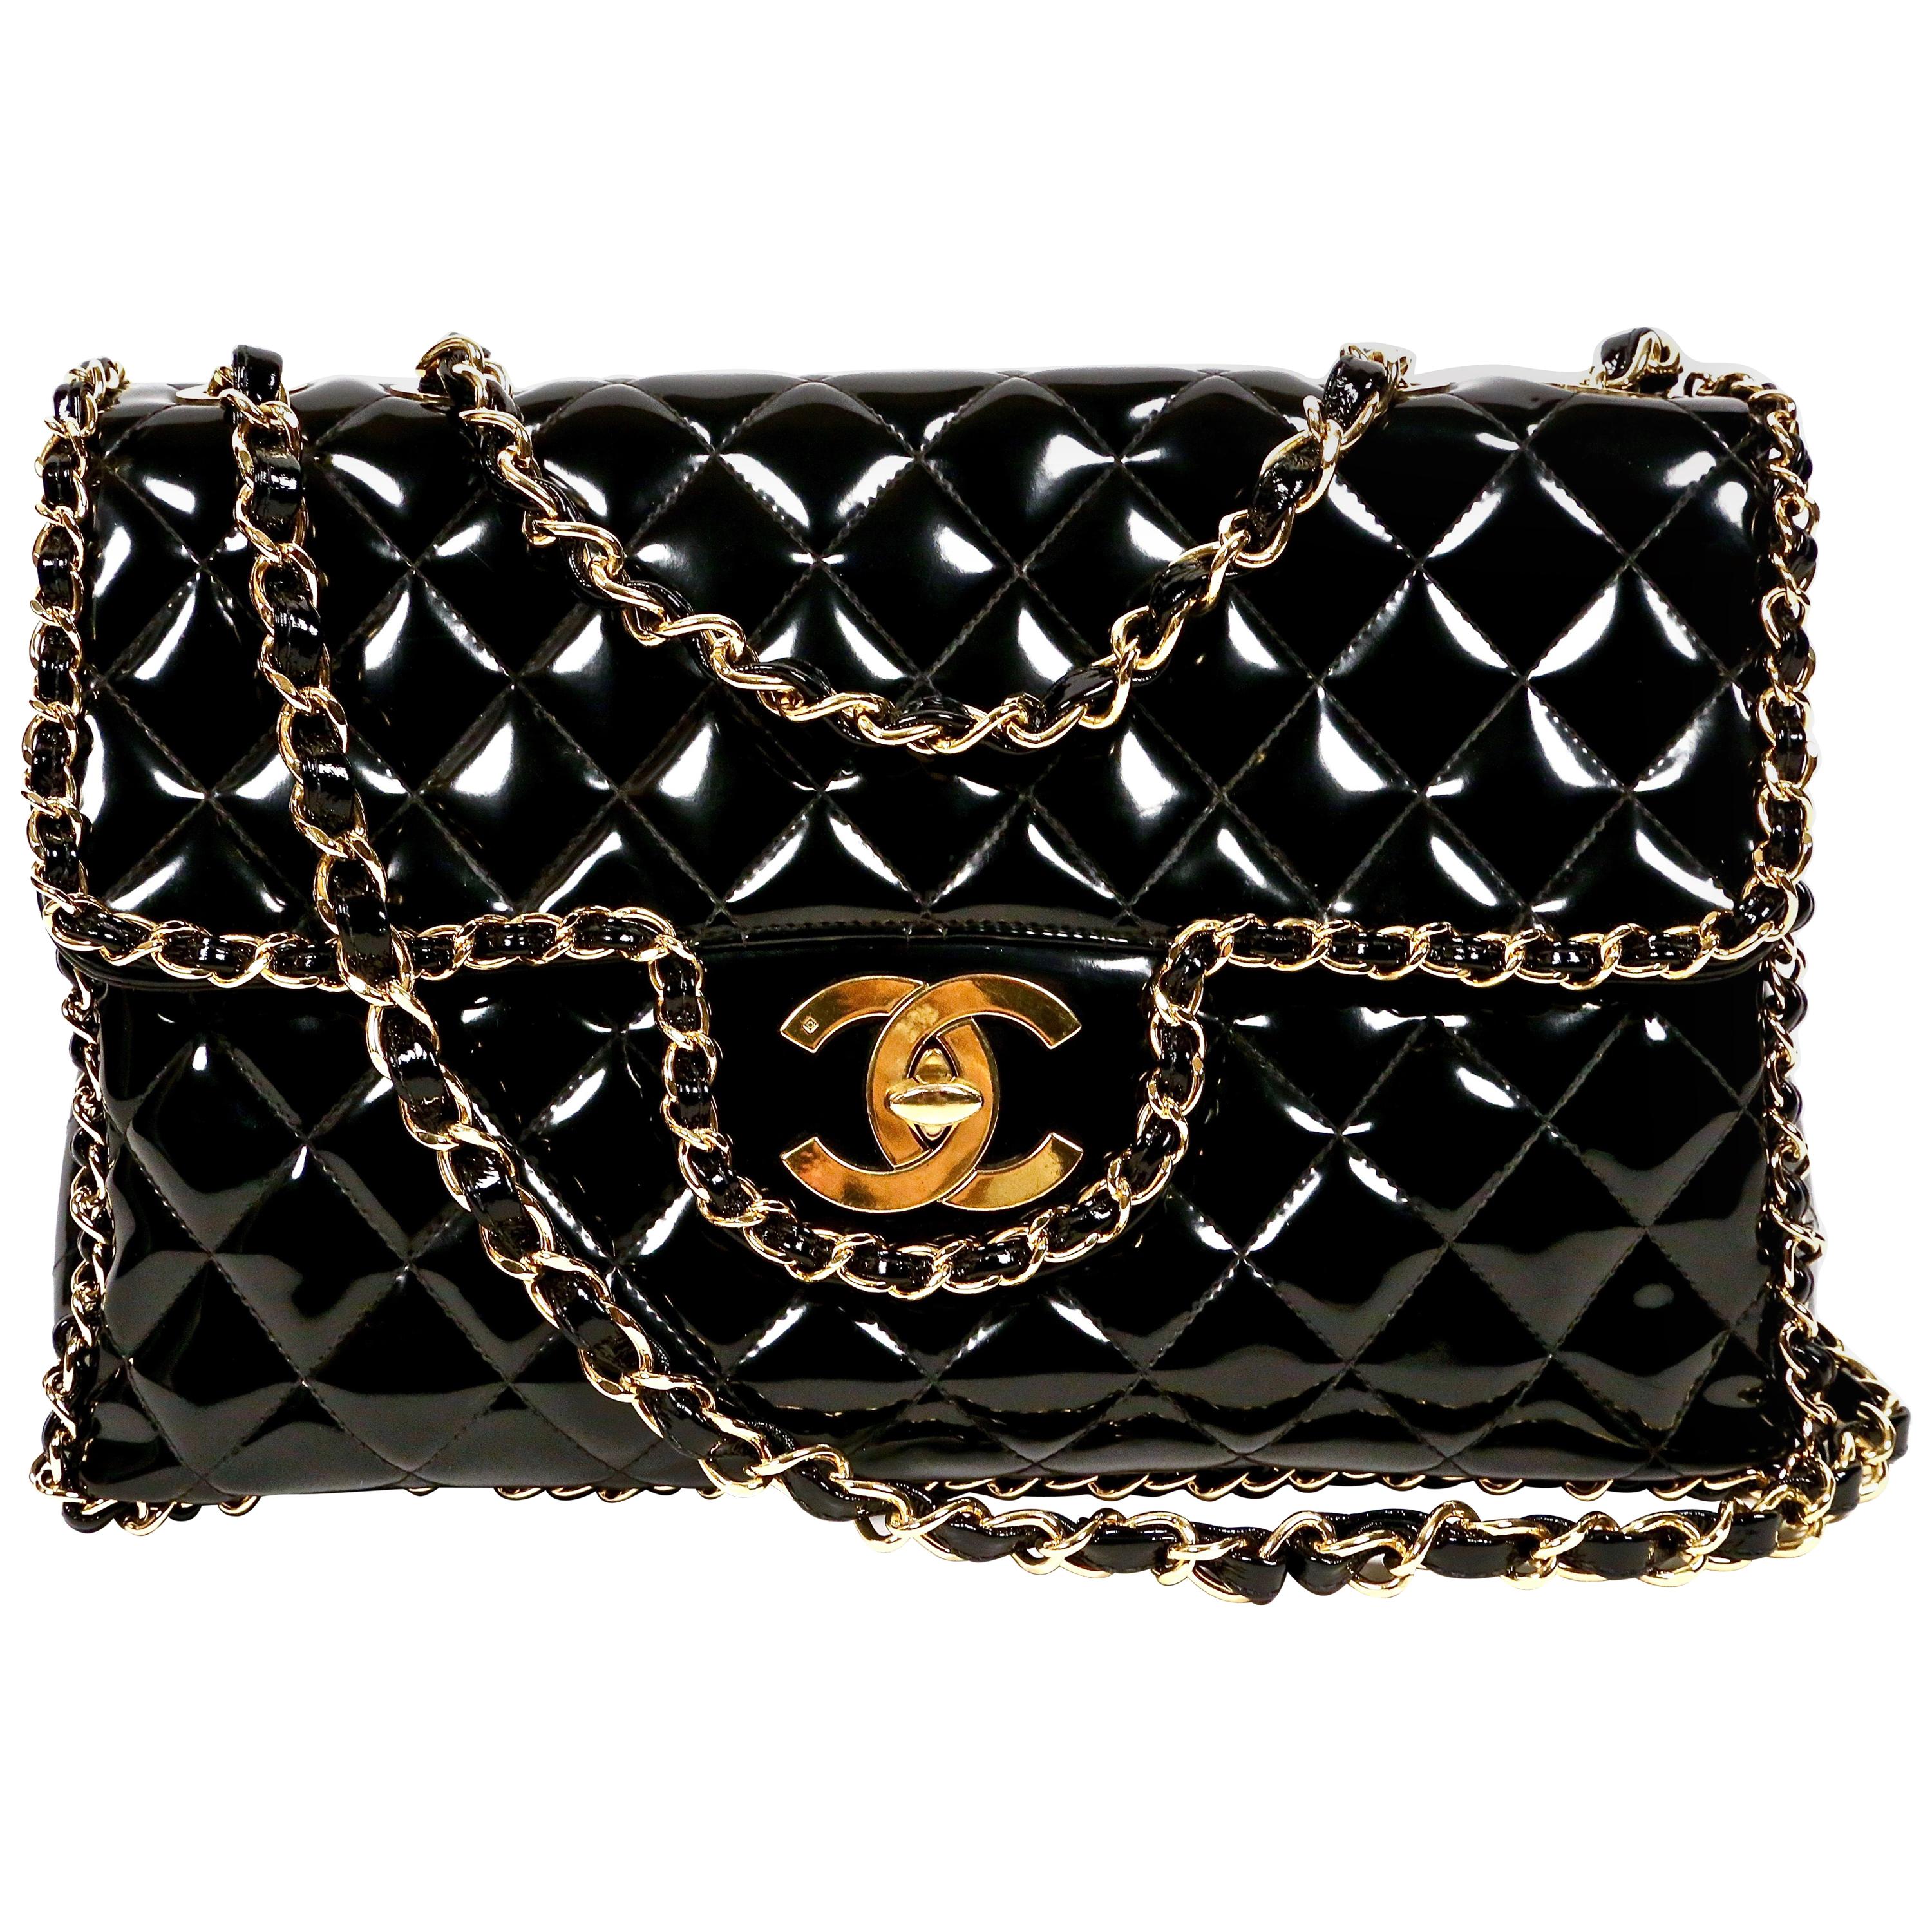 Chanel Patent Square Quilt Clutch w/ Chain